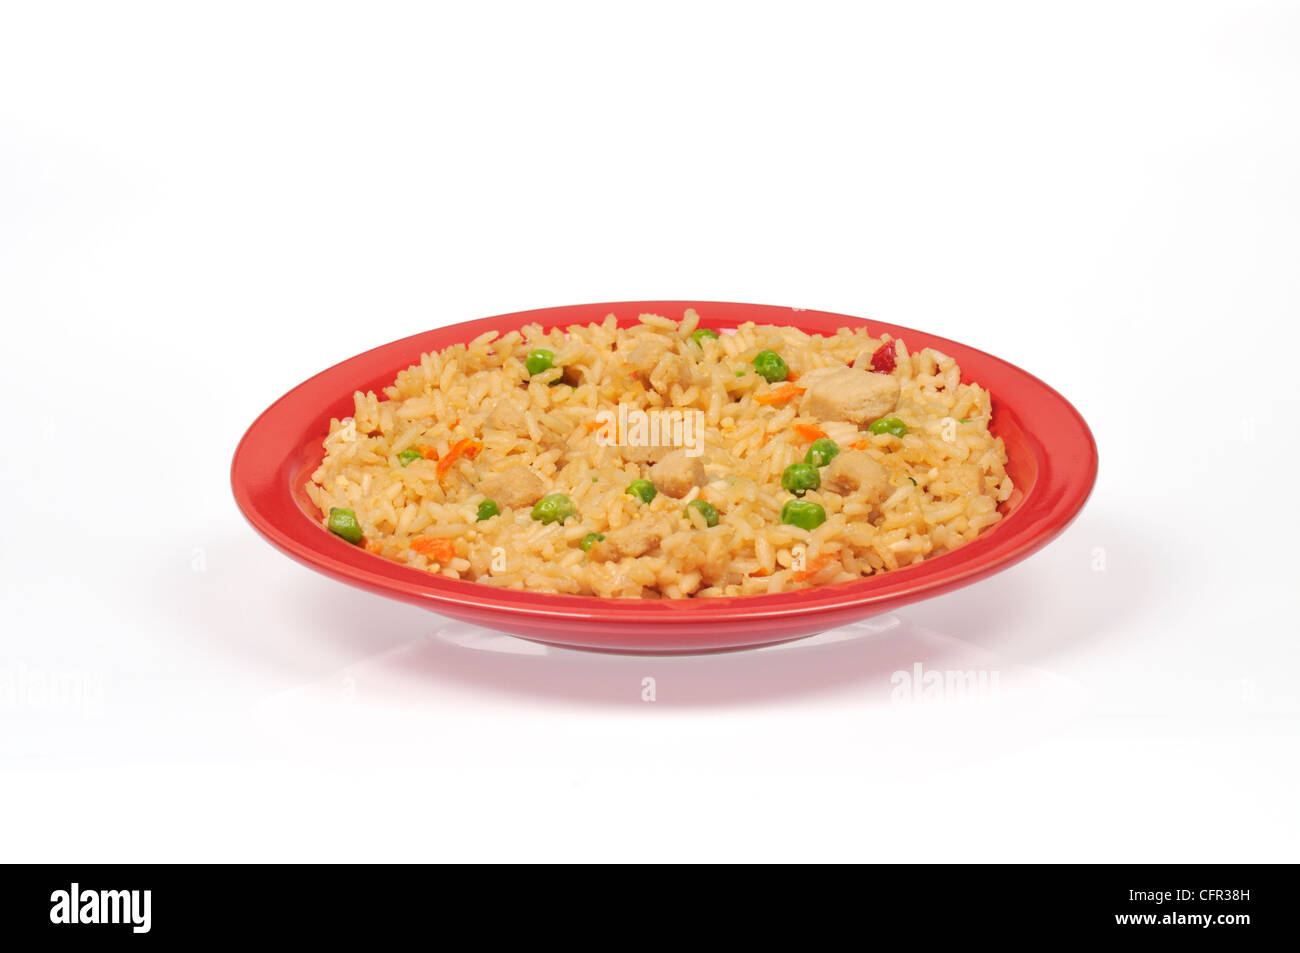 Chicken fried rice on red plate isolated Stock Photo